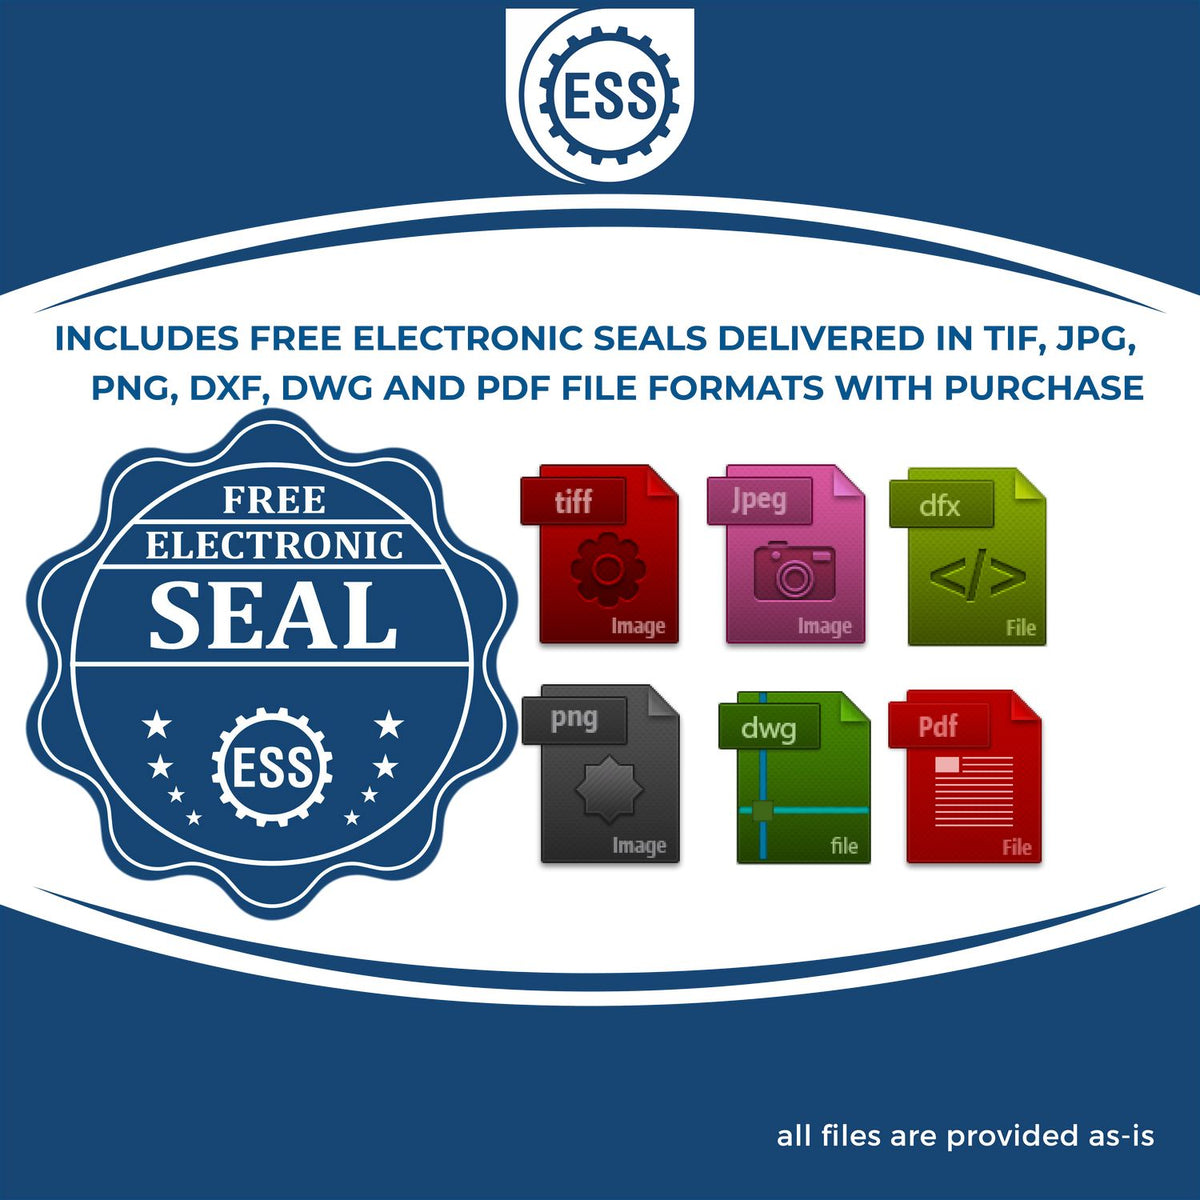 An infographic for the free electronic seal for the Handheld Georgia Land Surveyor Seal illustrating the different file type icons such as DXF, DWG, TIF, JPG and PNG.